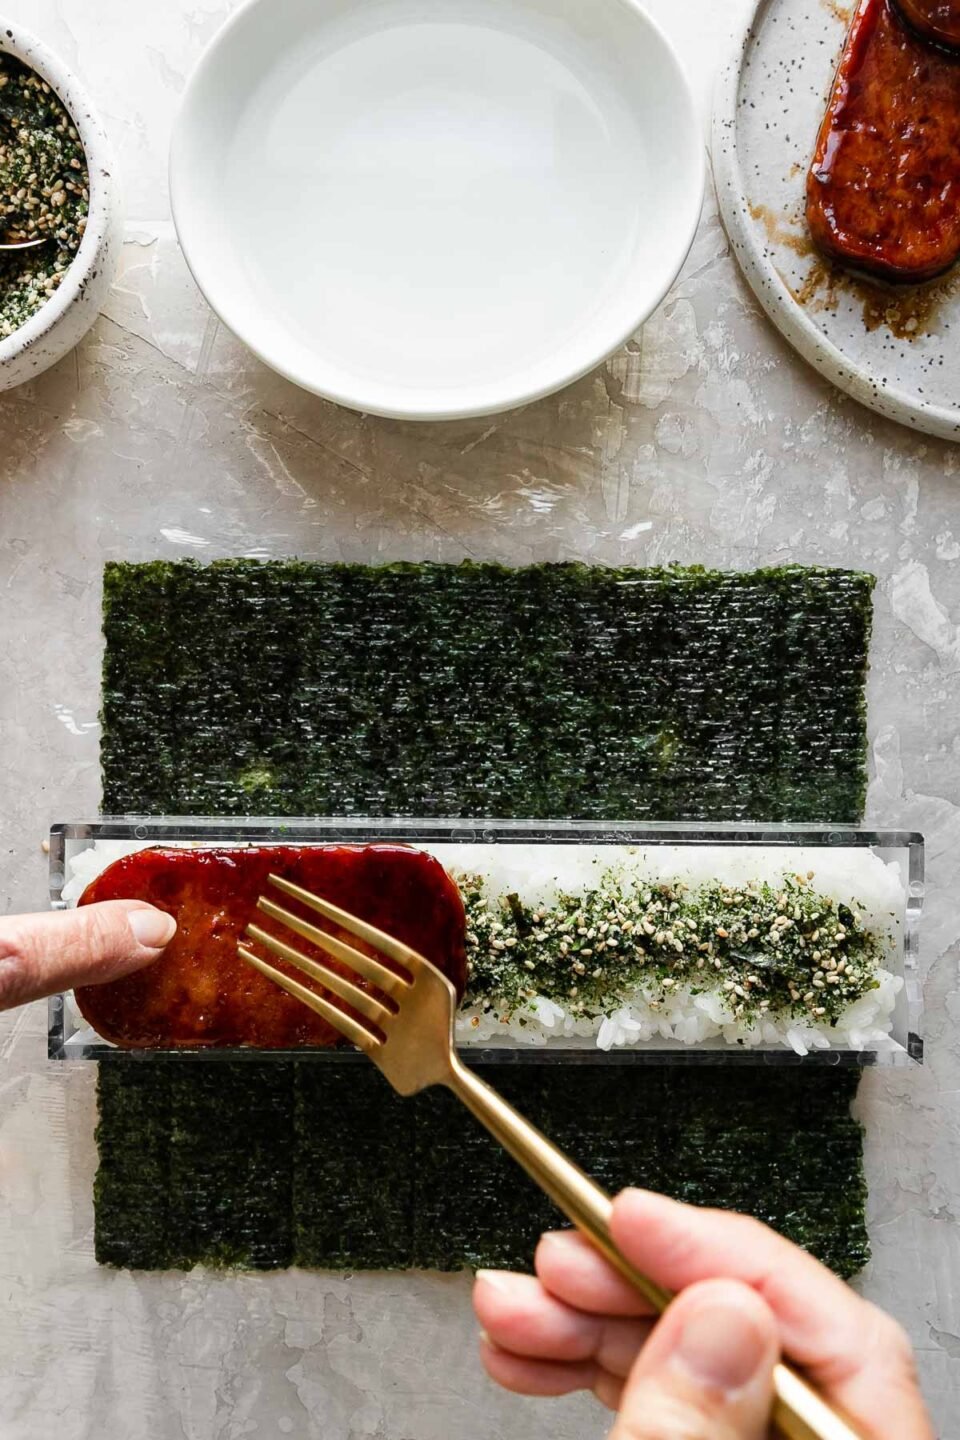 A close up of a woman using her hands and a fork to top a rice filled and furikake seasoned outer box of a double musubi mold with a slice of pan-fried teriyaki Spam. The musubi mold rests atop a single sheet of sushi nori arranged on a piece of plastic wrap atop a creamy white textured surface. Resting above the nori & the musubi mold is a small bowl filled with furikake seasoning with a spoon resting inside, another small white bowl filled with water, and a small speckled ceramic plate with pan-fried teriyaki Spam.